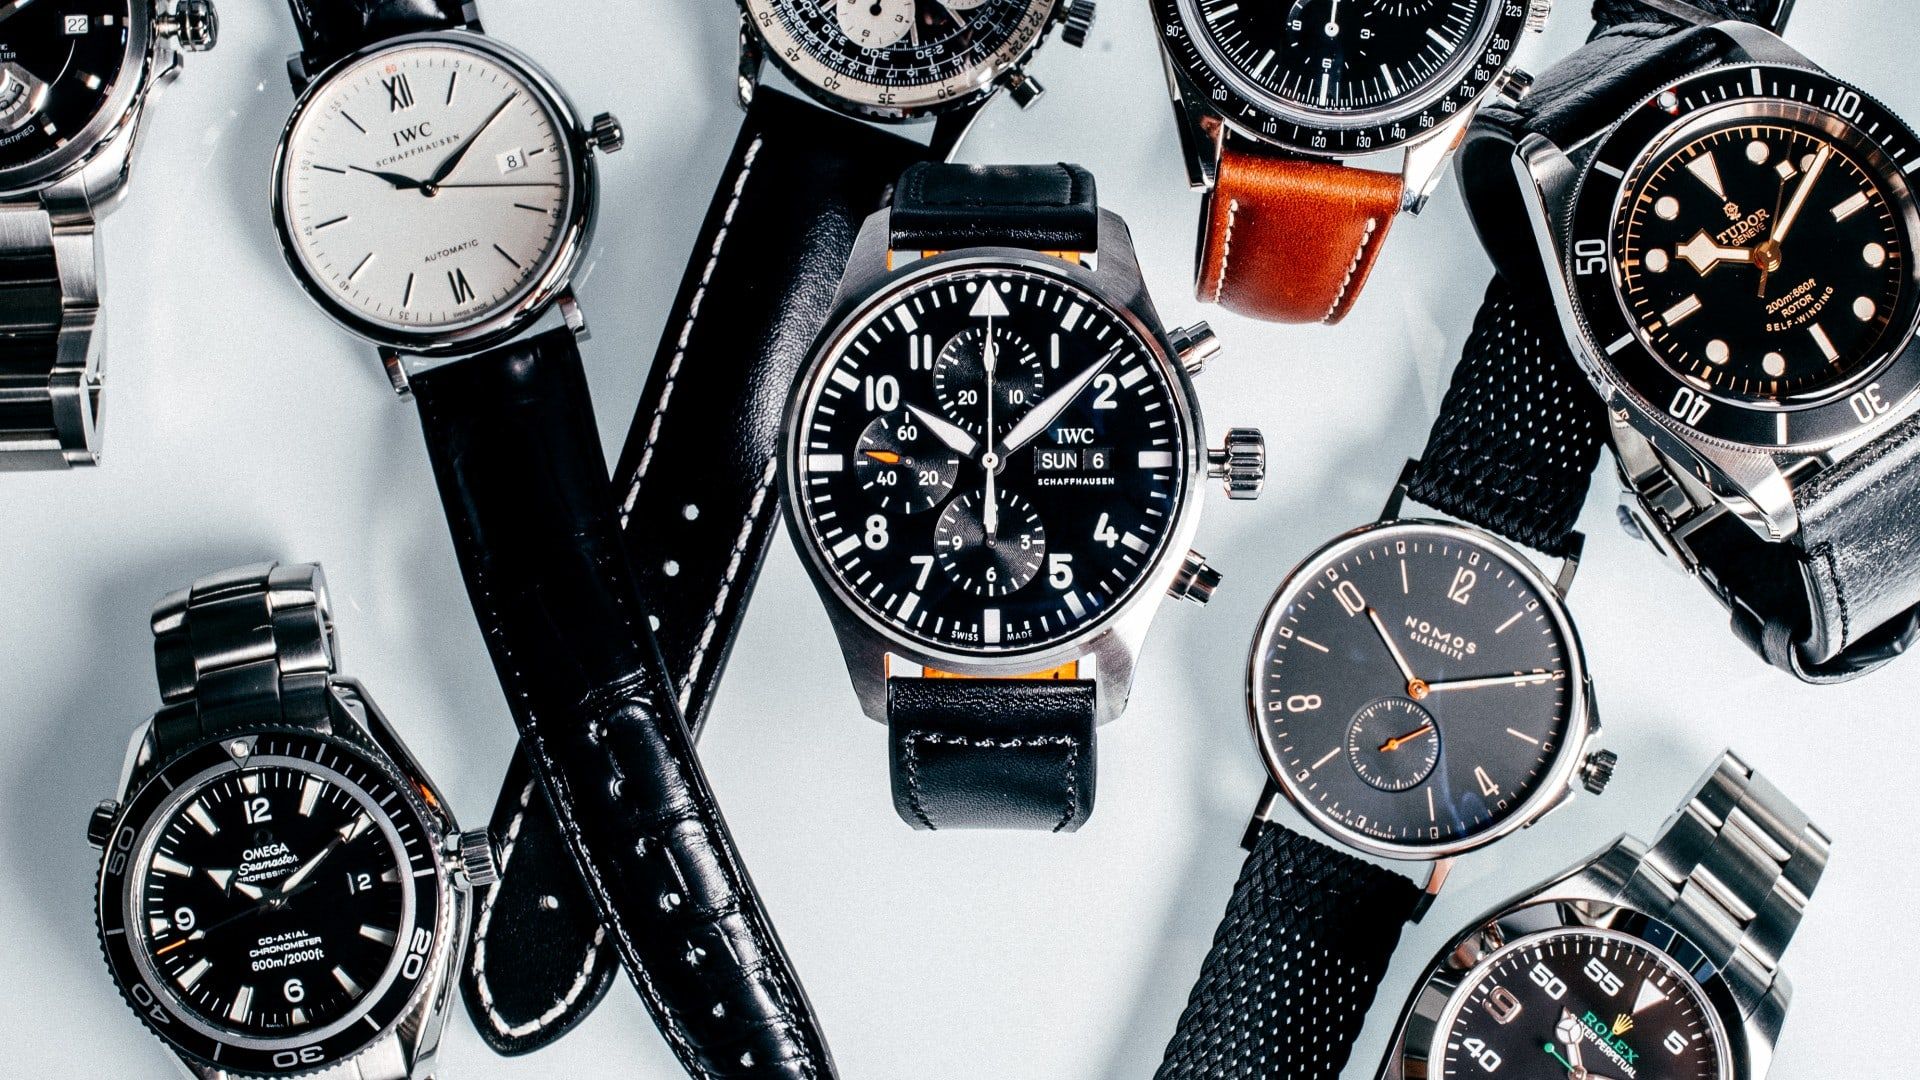 A1 Watch Collection in Station Road,Sambhal - Best Casio-Wrist Watch  Dealers in Sambhal - Justdial